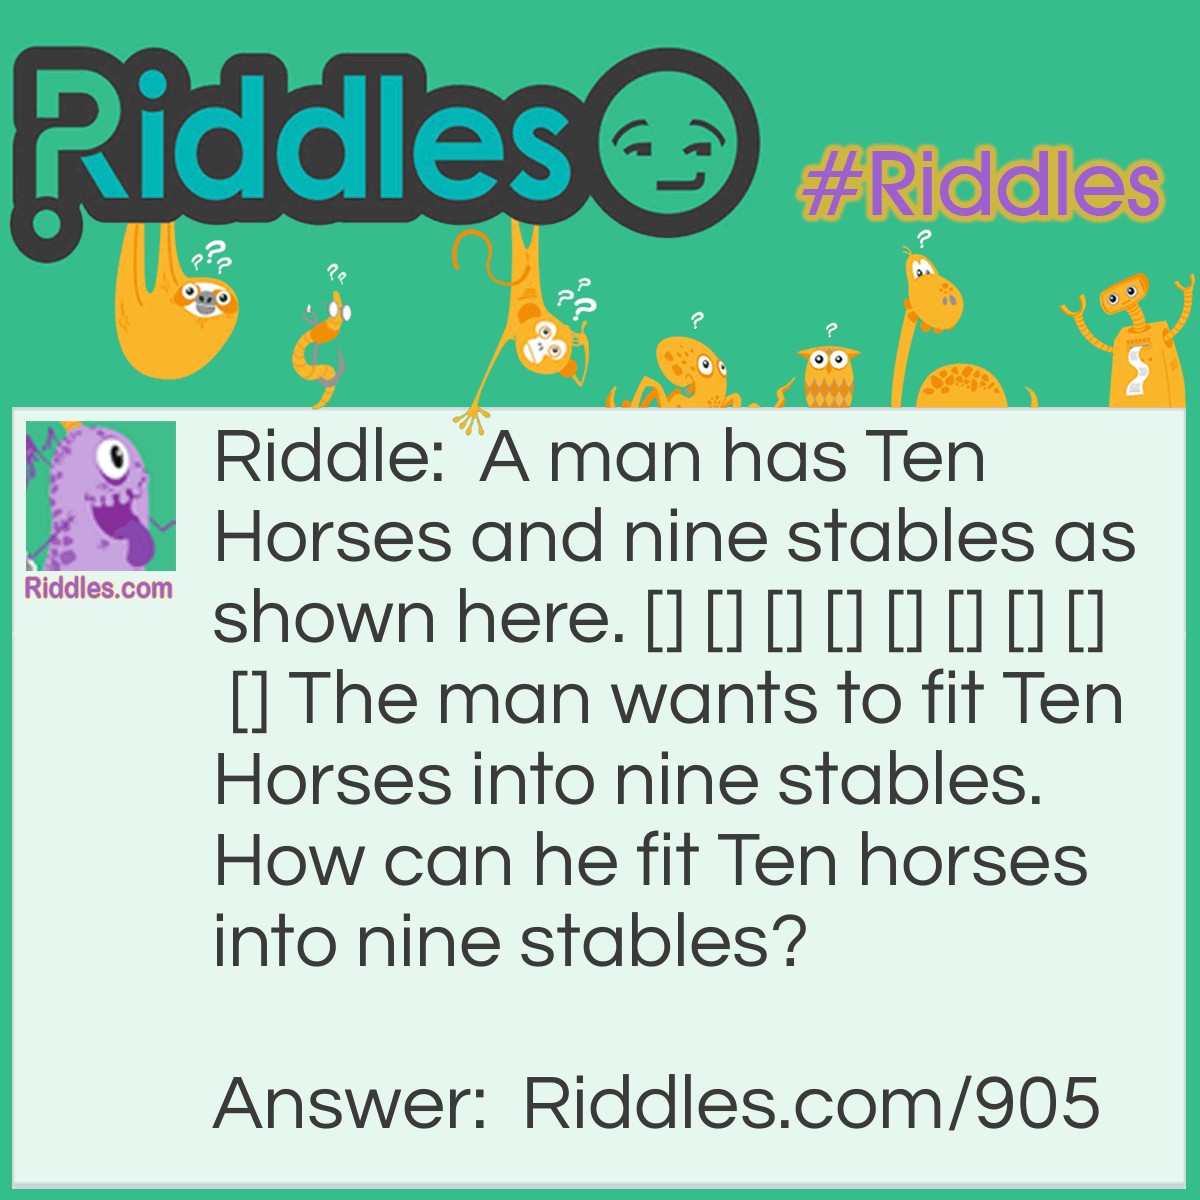 Riddle: A man has Ten Horses and nine stables as shown here. [] [] [] [] [] [] [] [] [] The man wants to fit Ten Horses into nine stables. How can he fit Ten horses into nine stables? Answer: One letter for each stable. [T][E][N] [H][O][R][S][E][S]